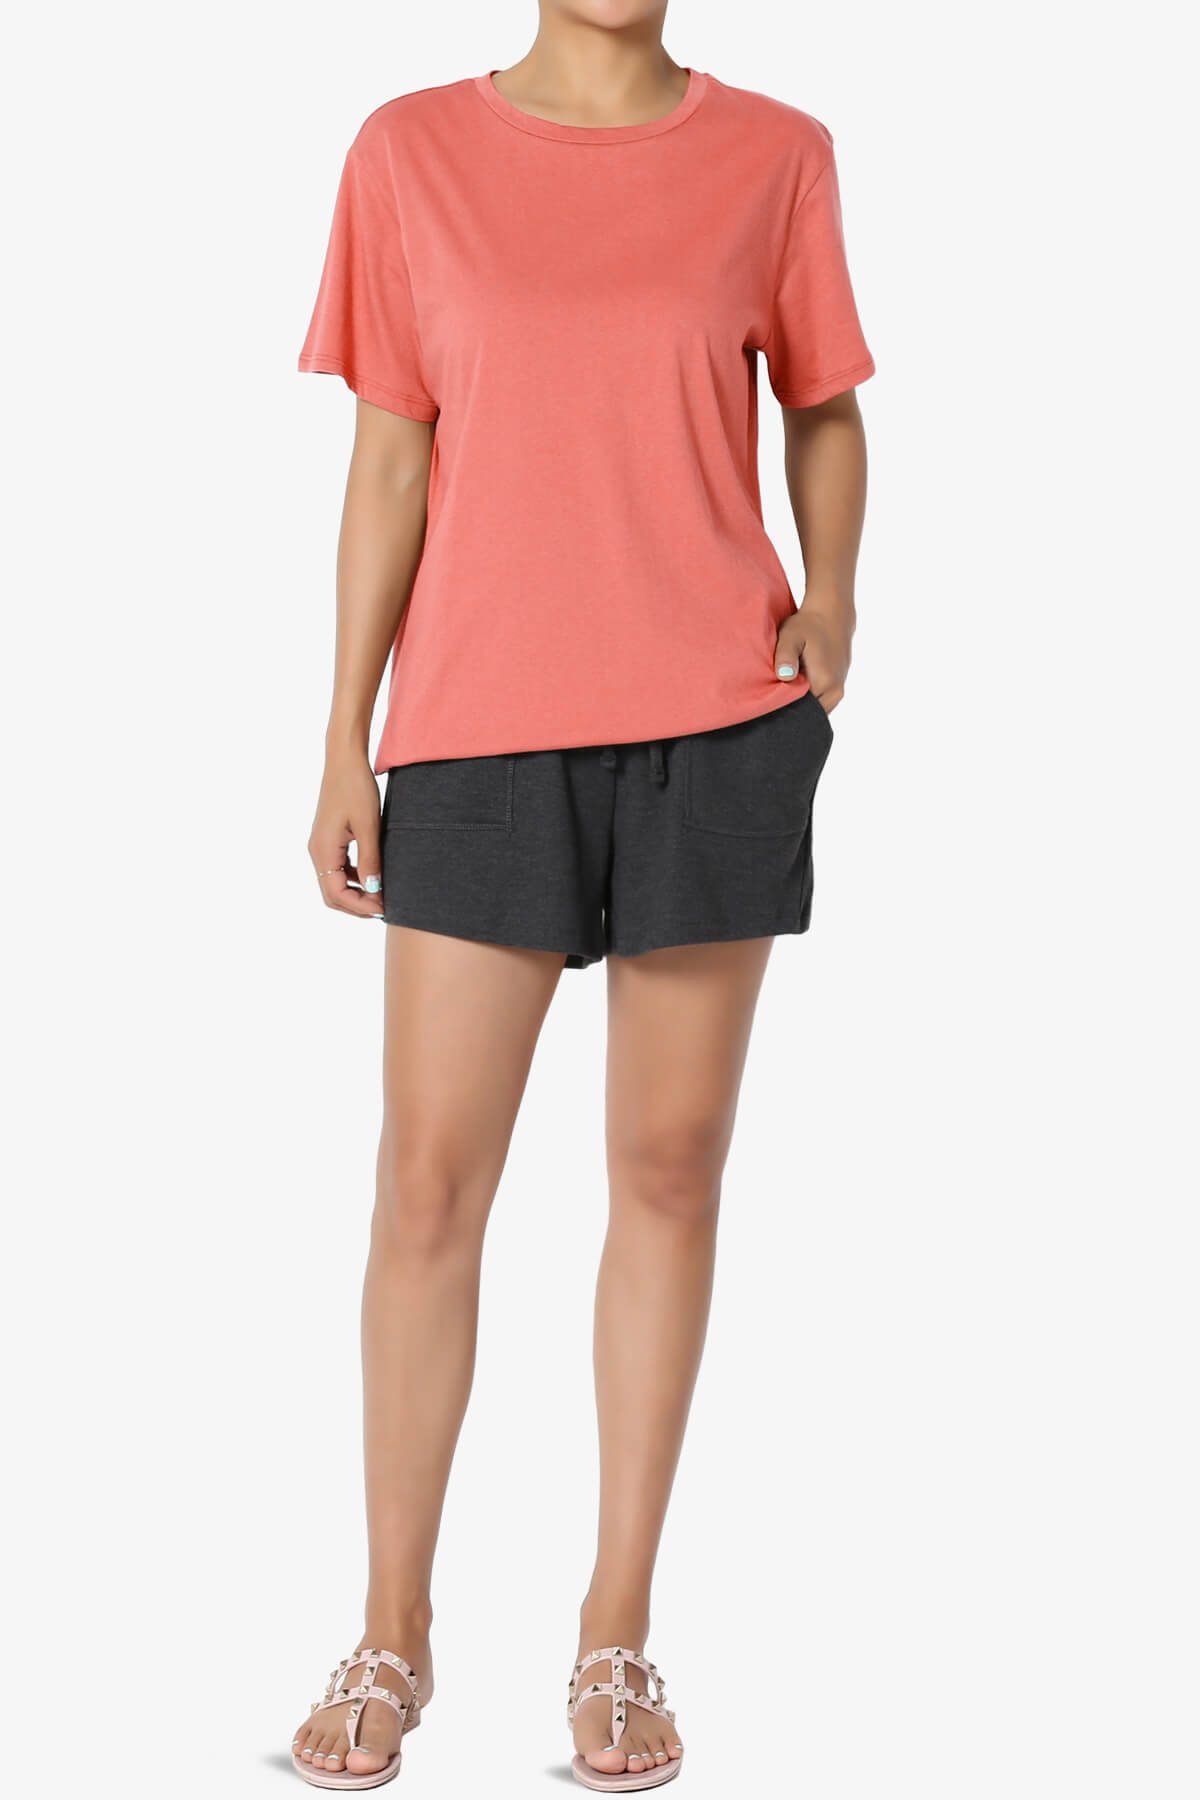 Load image into Gallery viewer, Mayra O Neck Cotton Boyfriend Tee CORAL_6
